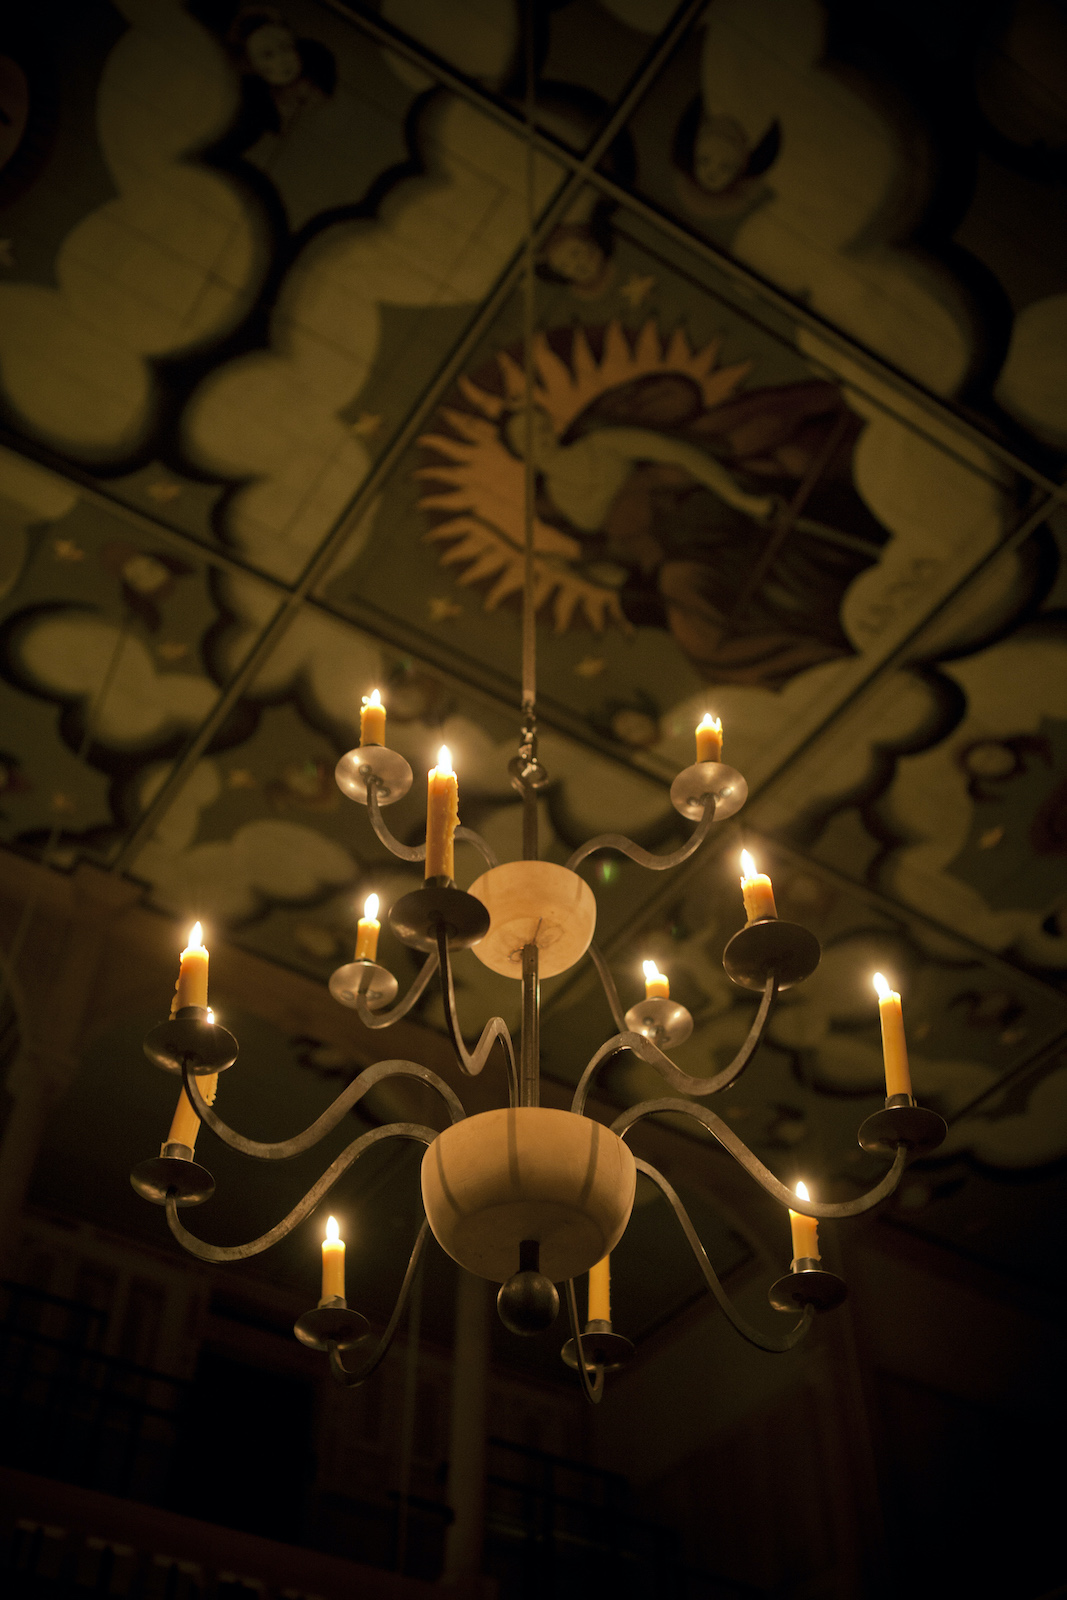 A lit candelabra hangs from a decorated ceiling.